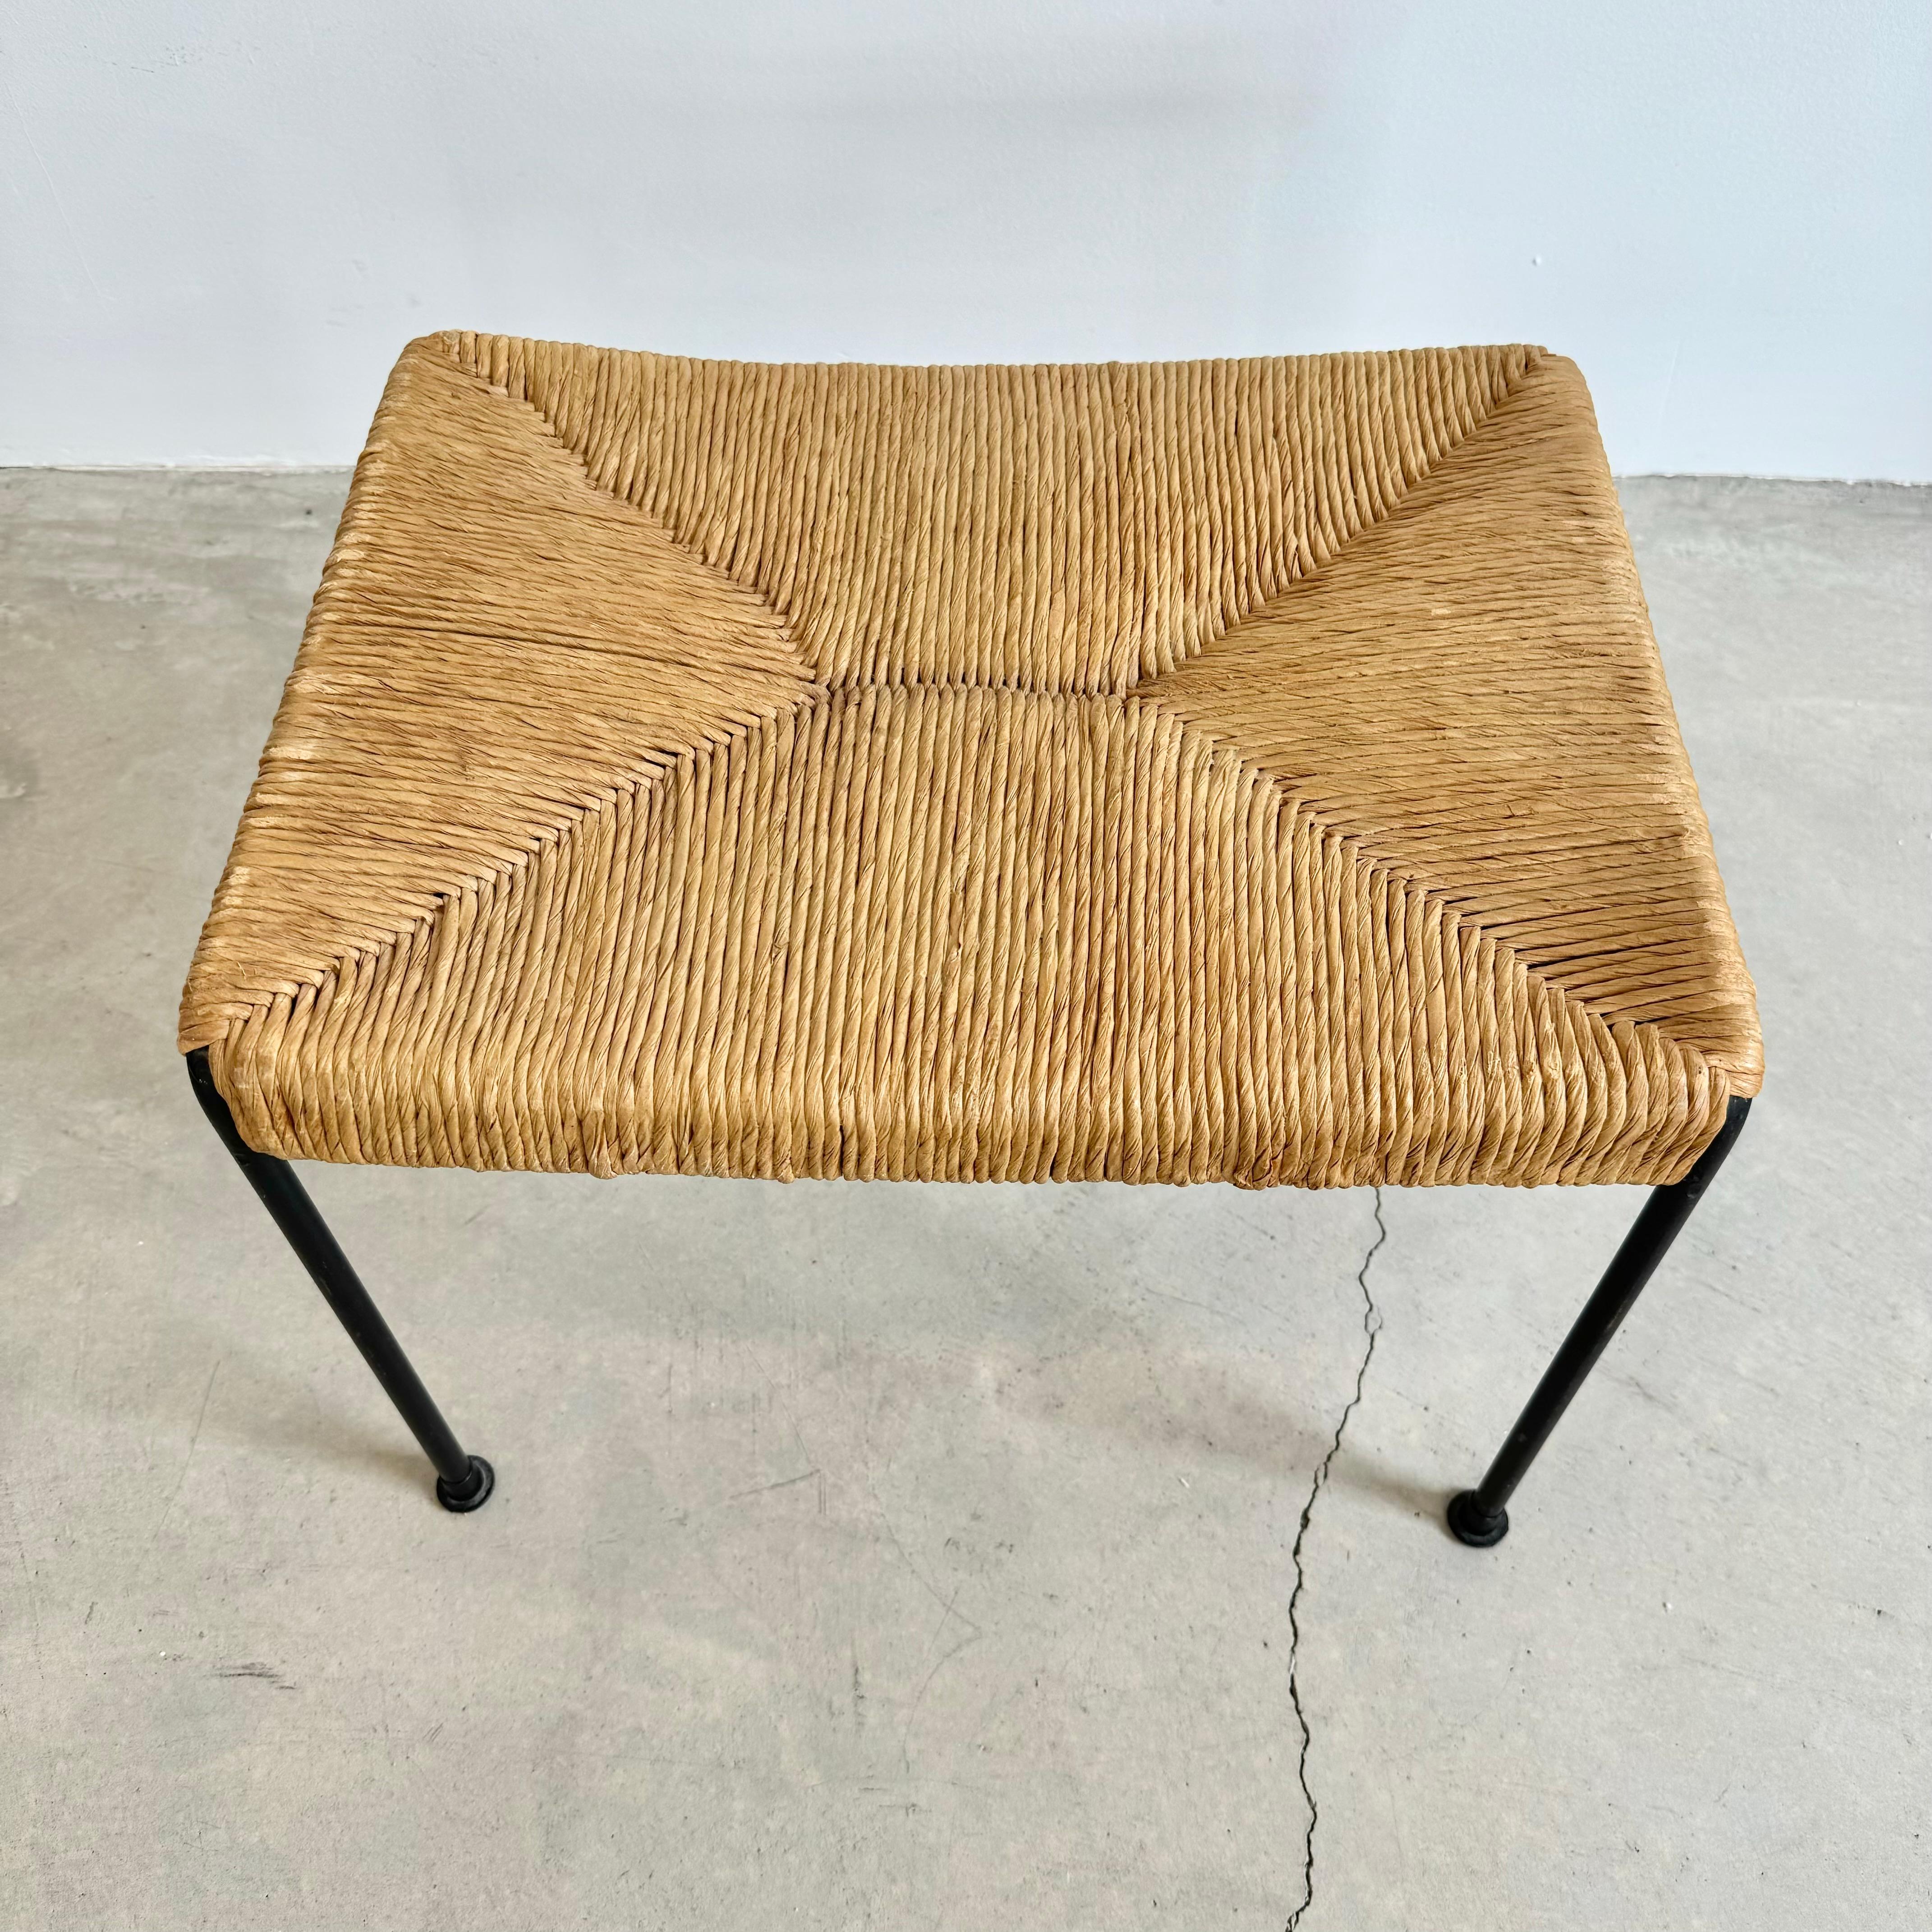 Sculptural Arthur Umanoff stool with signature rush seat supported by an iron frame. Iron is painted in a vintage black. Good vintage condition. Only one available. 

Located in our Los Angeles showroom.